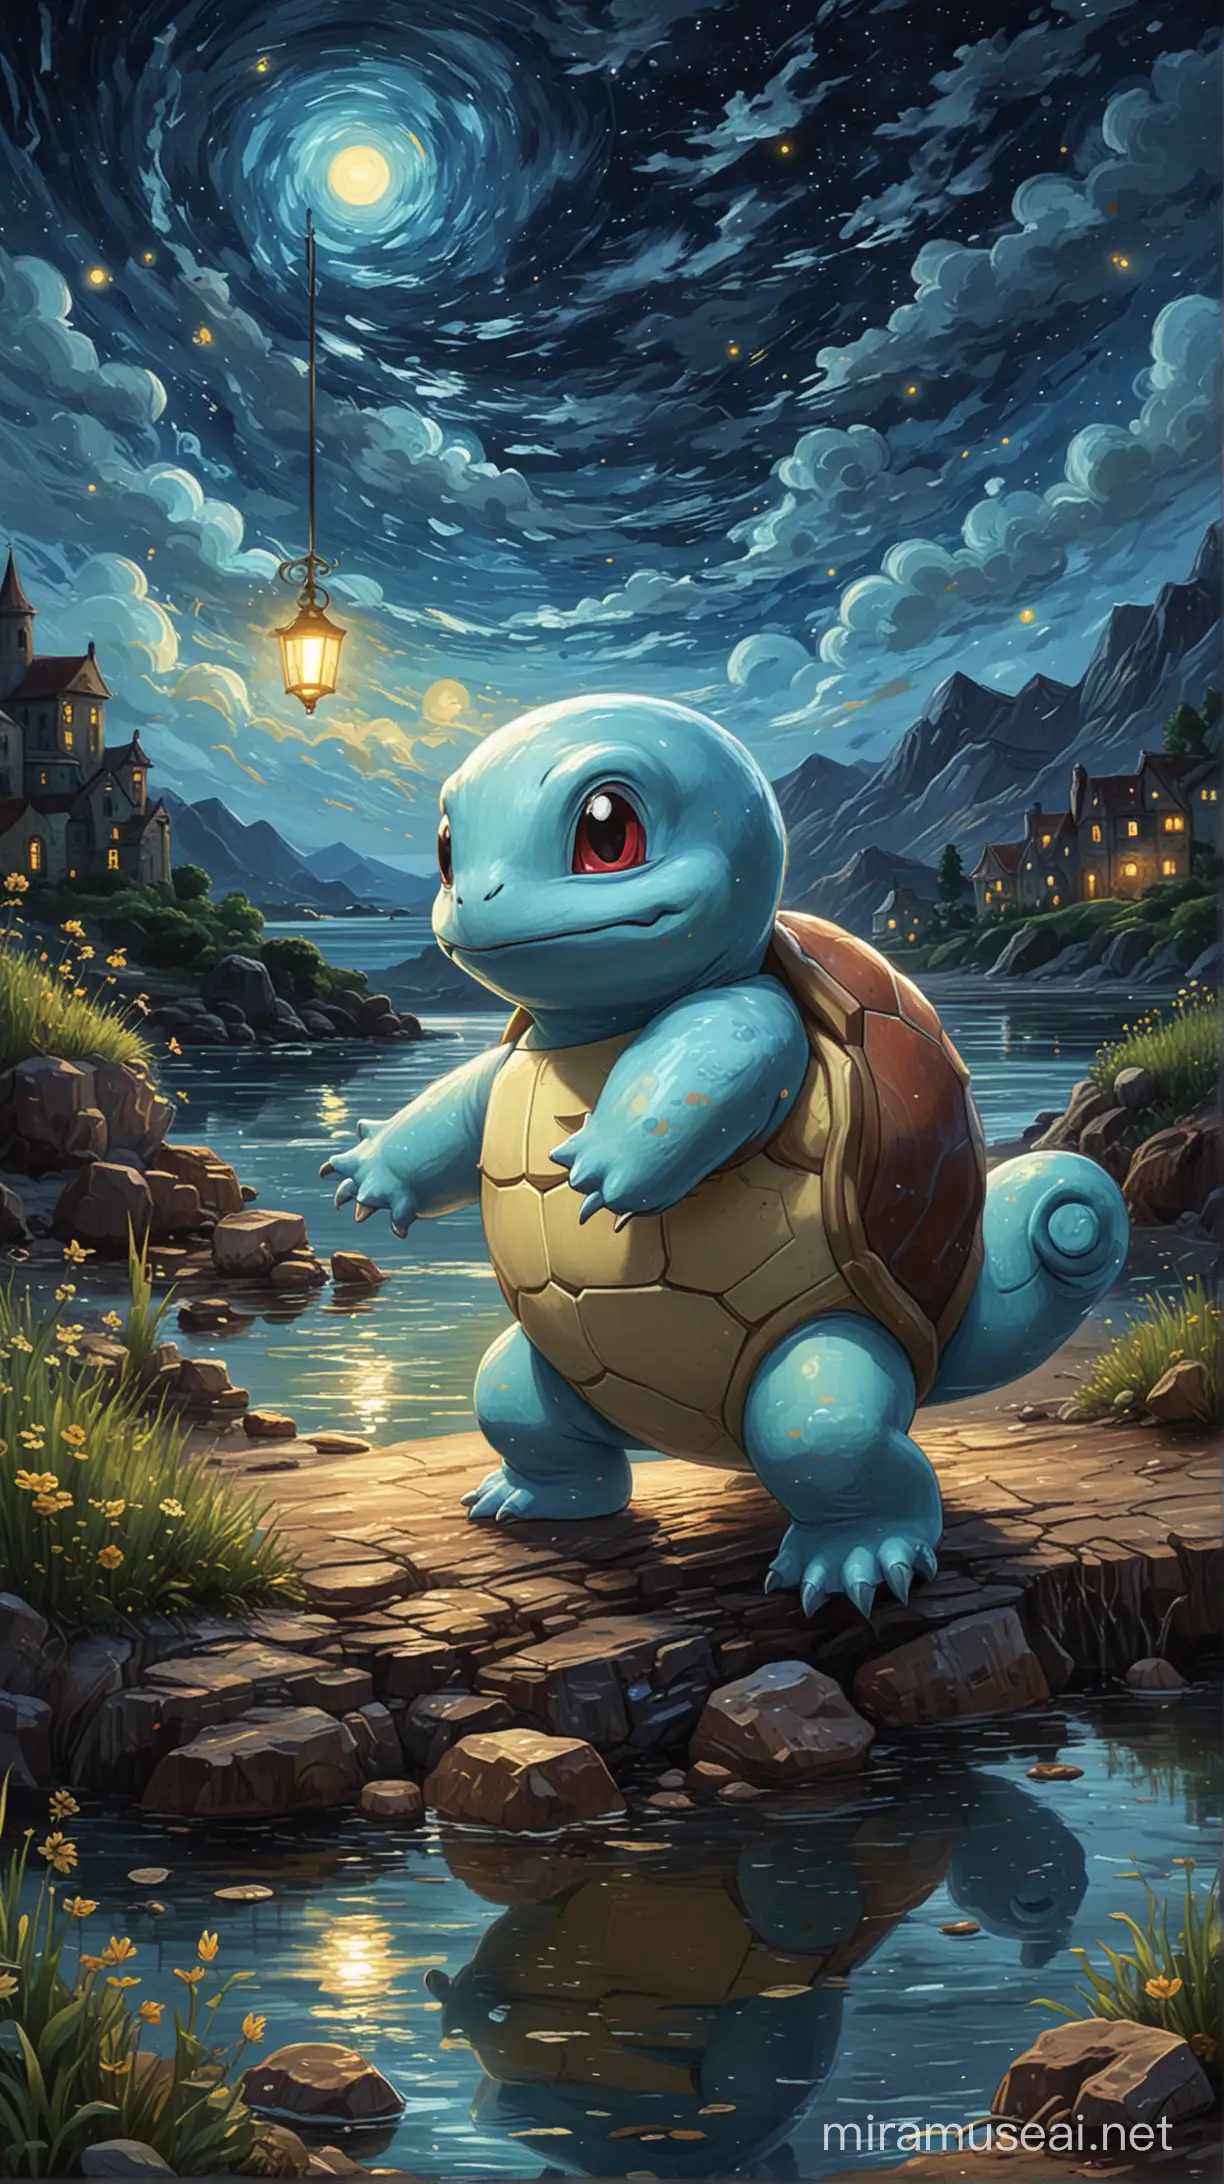 Pokemon squirtle in a night scène landscape in the style of van gogh painting 